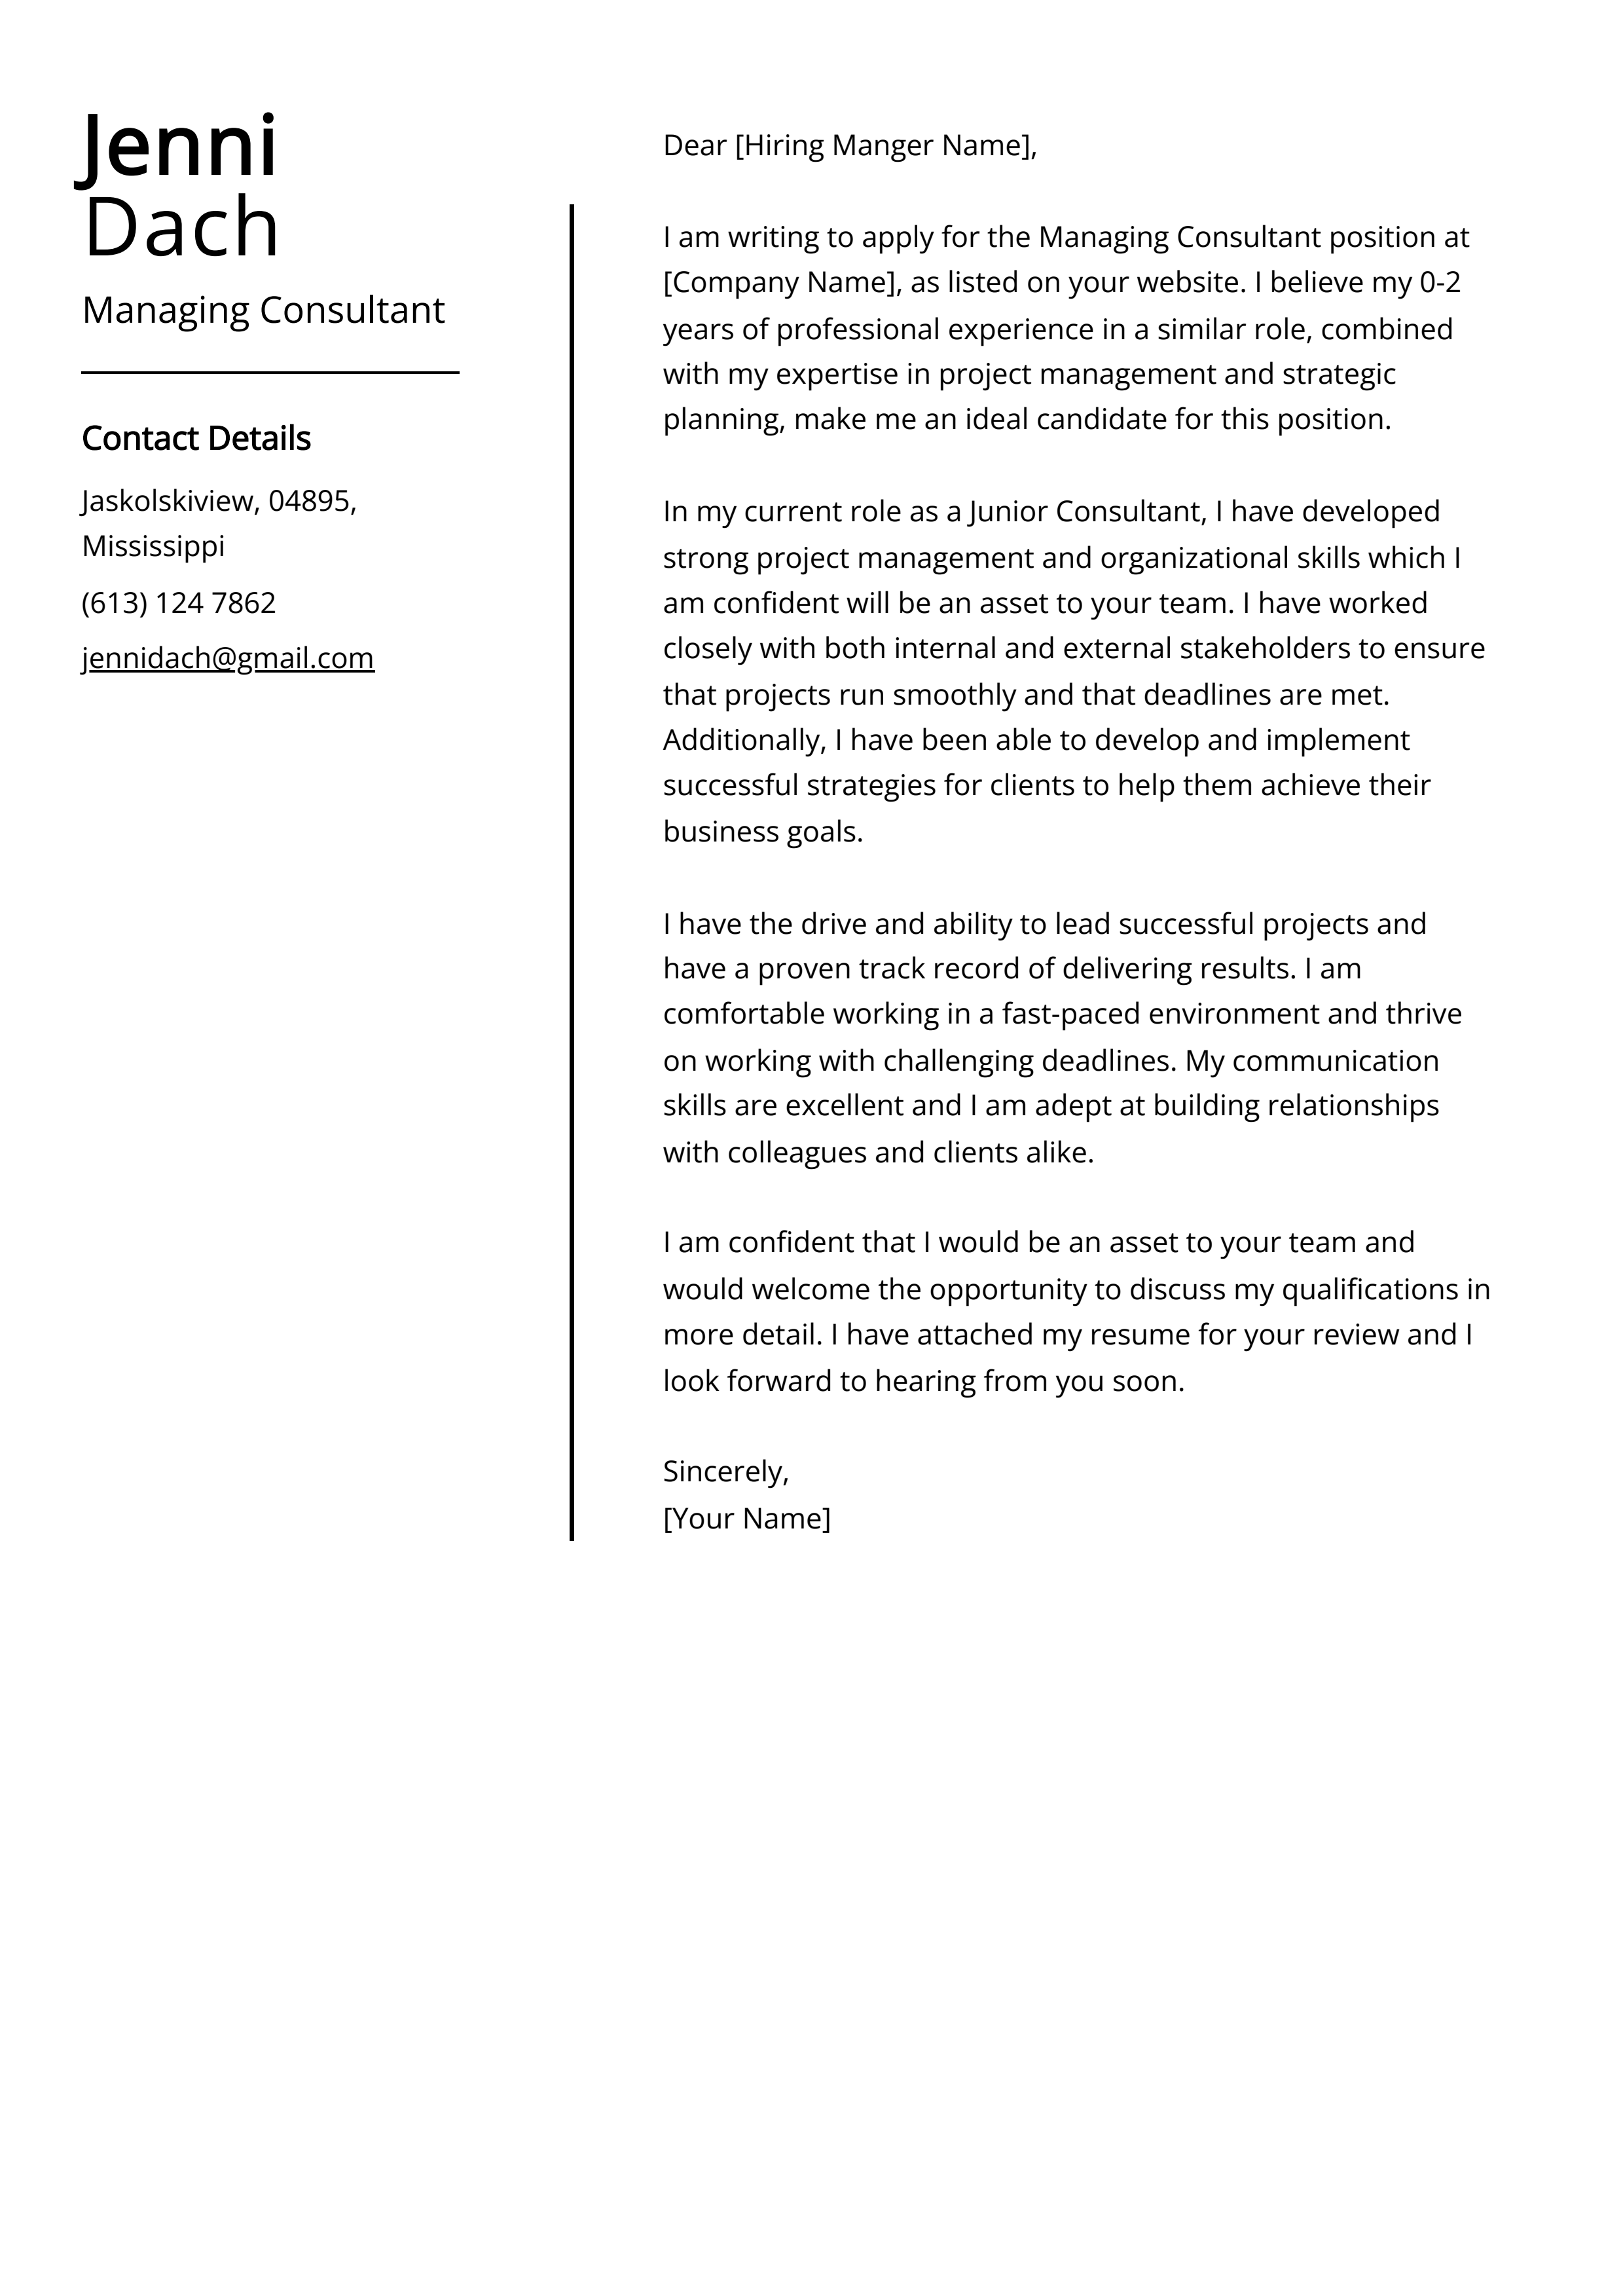 Managing Consultant Cover Letter Example